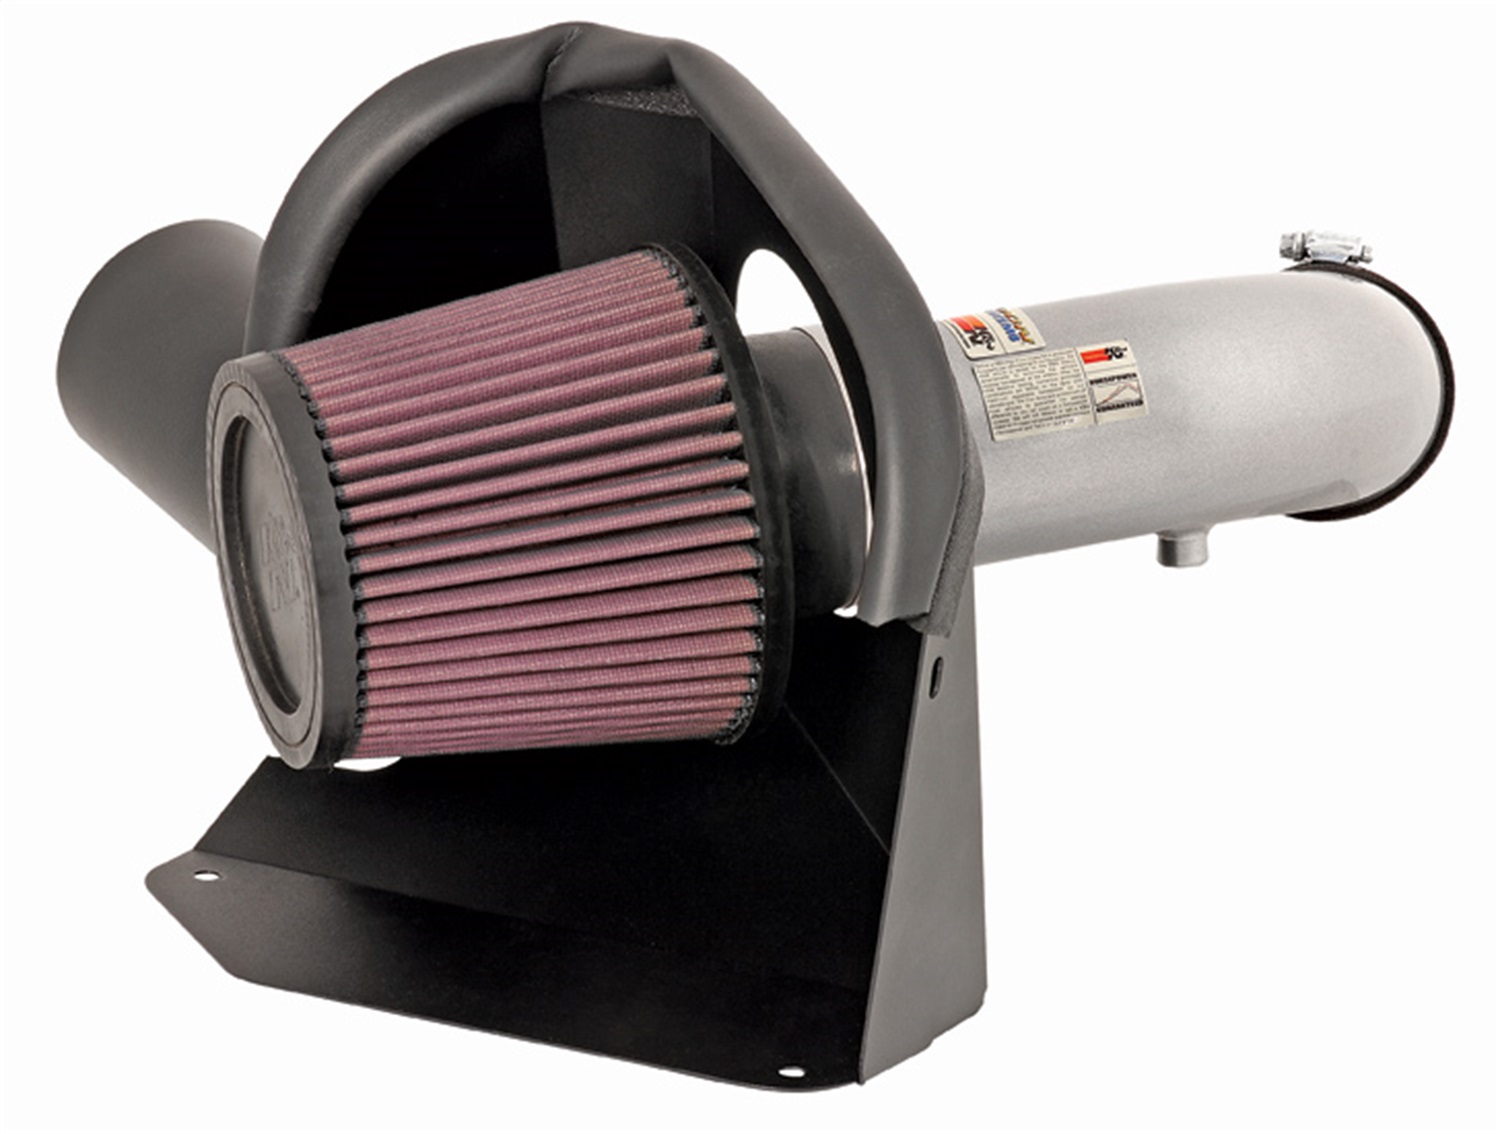 K&N Filters K&N Filters 69-7061TS Typhoon; Cold Air Intake Filter Assembly Fits 07-13 Altima